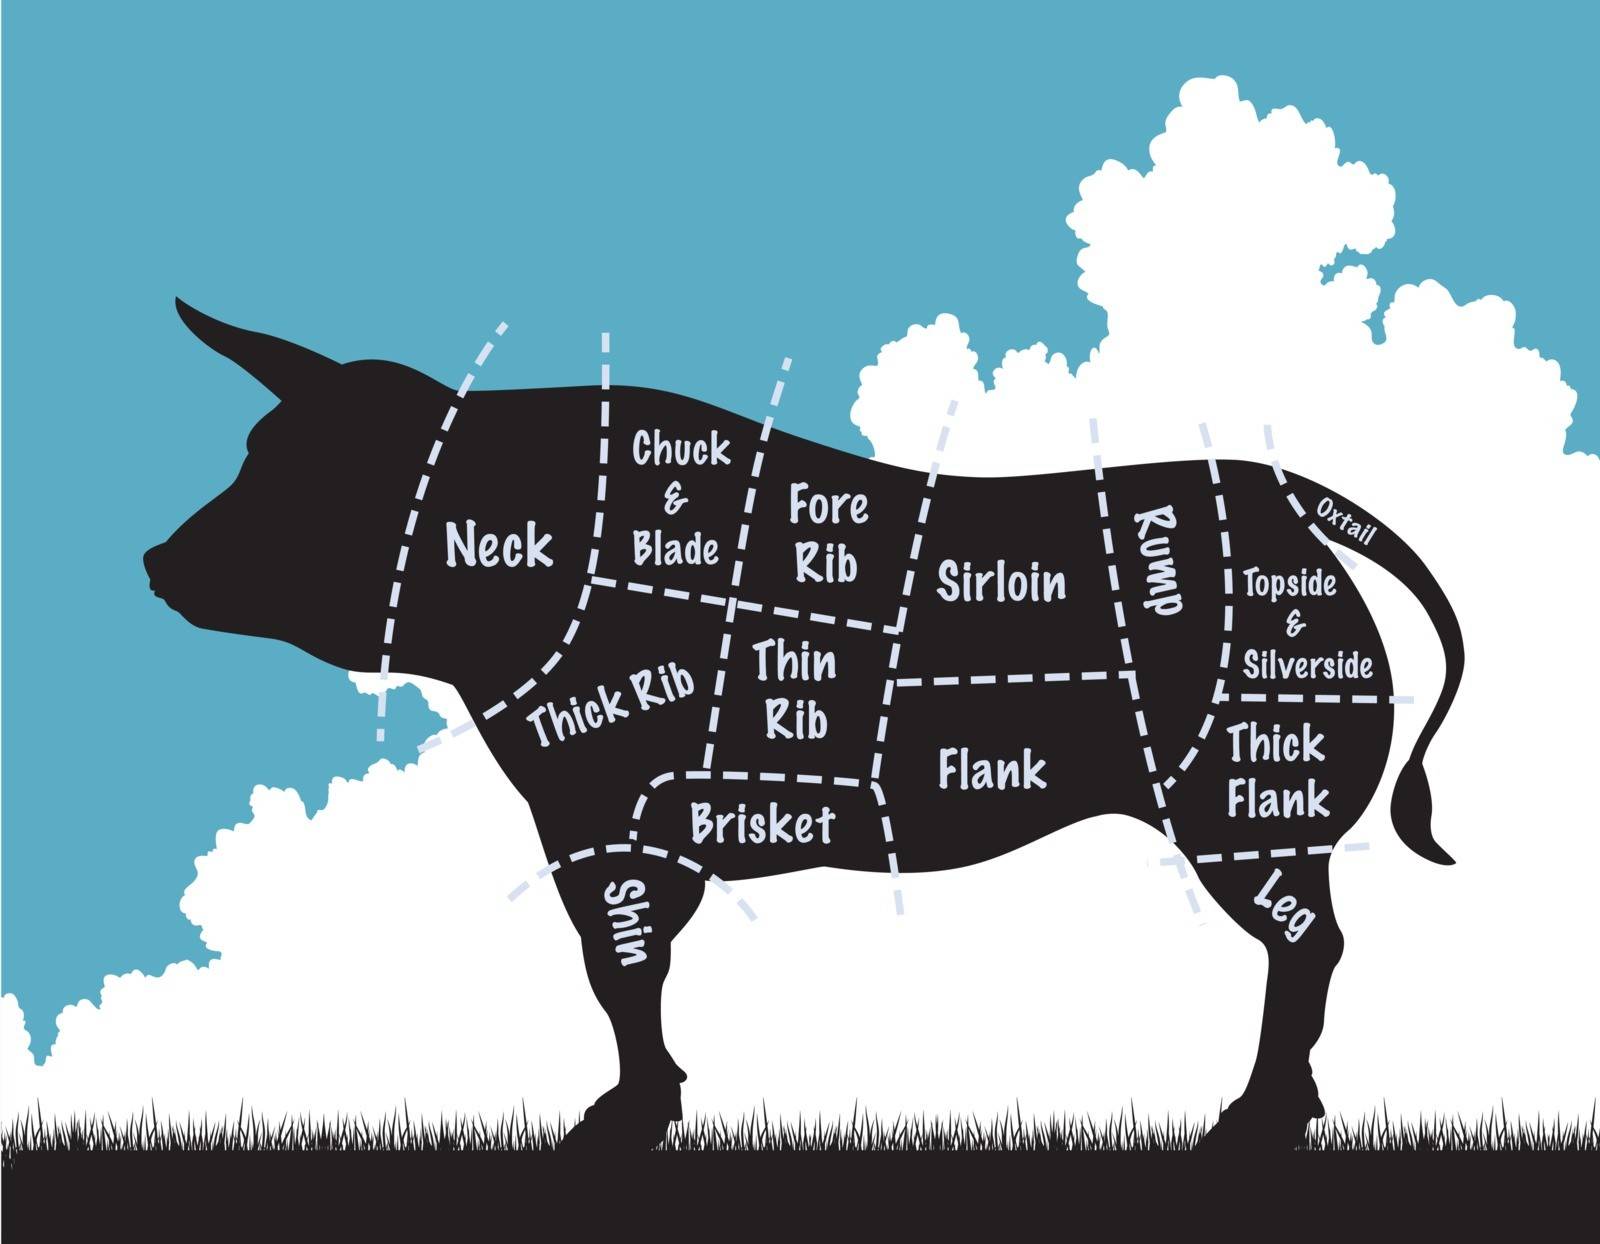 Editable vector illustration of a cow silhouette showing the cuts of meat